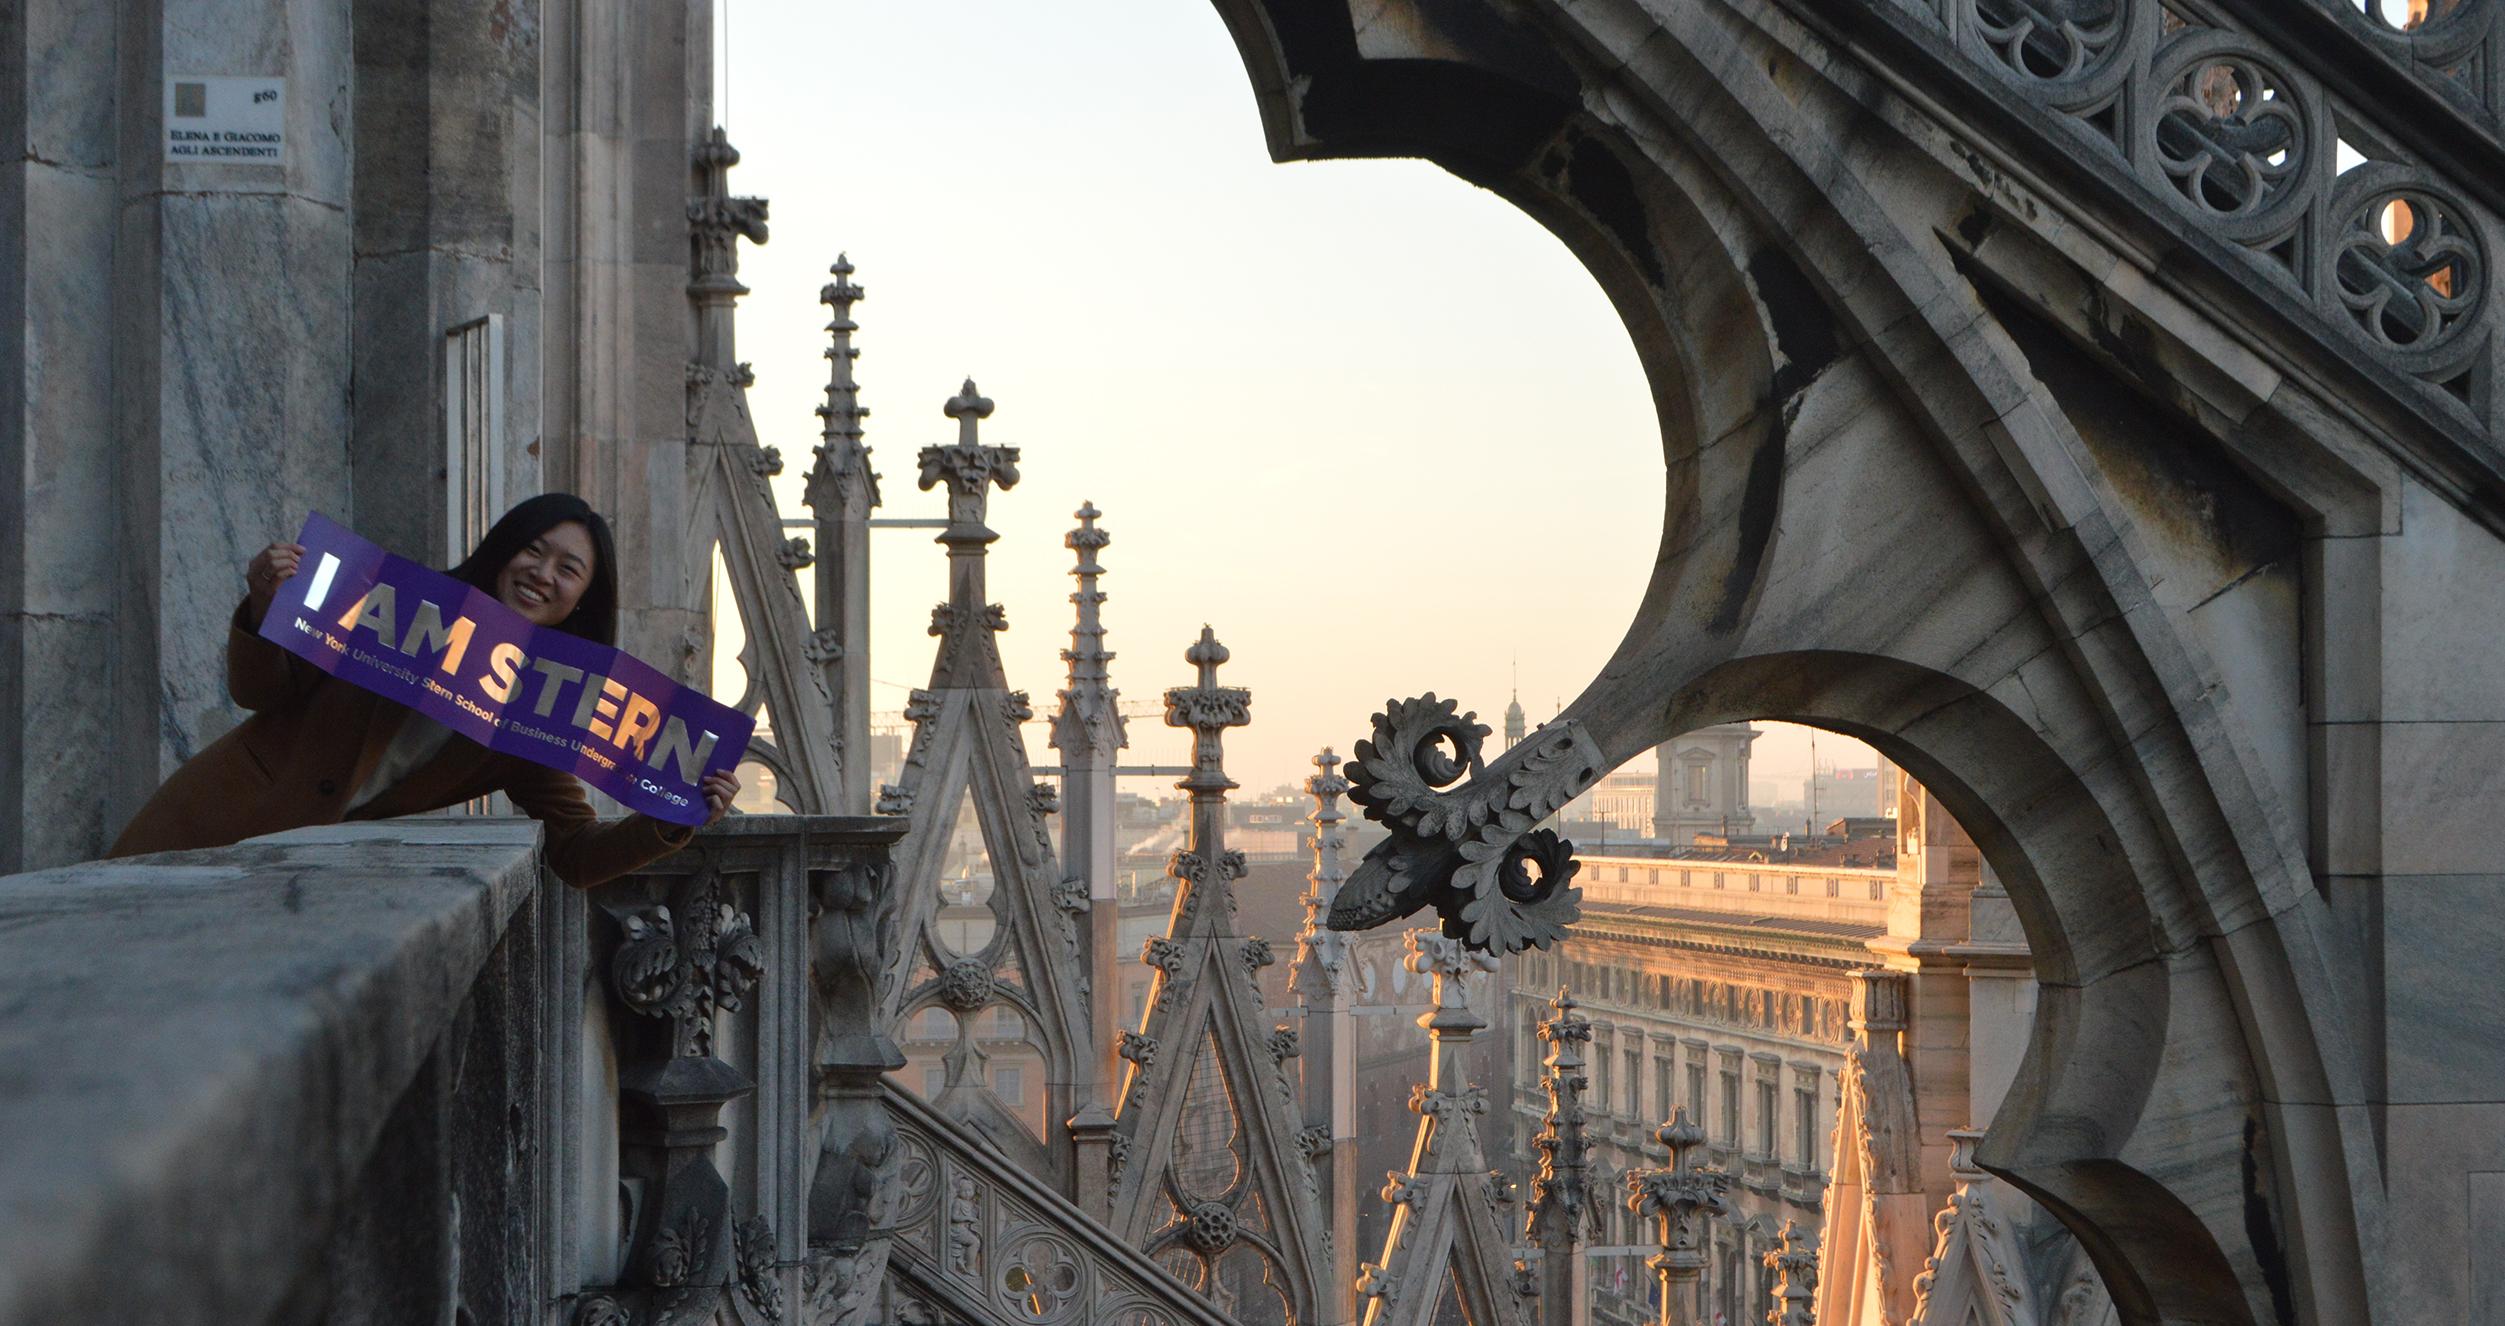 NYU Stern student Jessica Guo poses for a photo at the Duomo in Milan, Italy